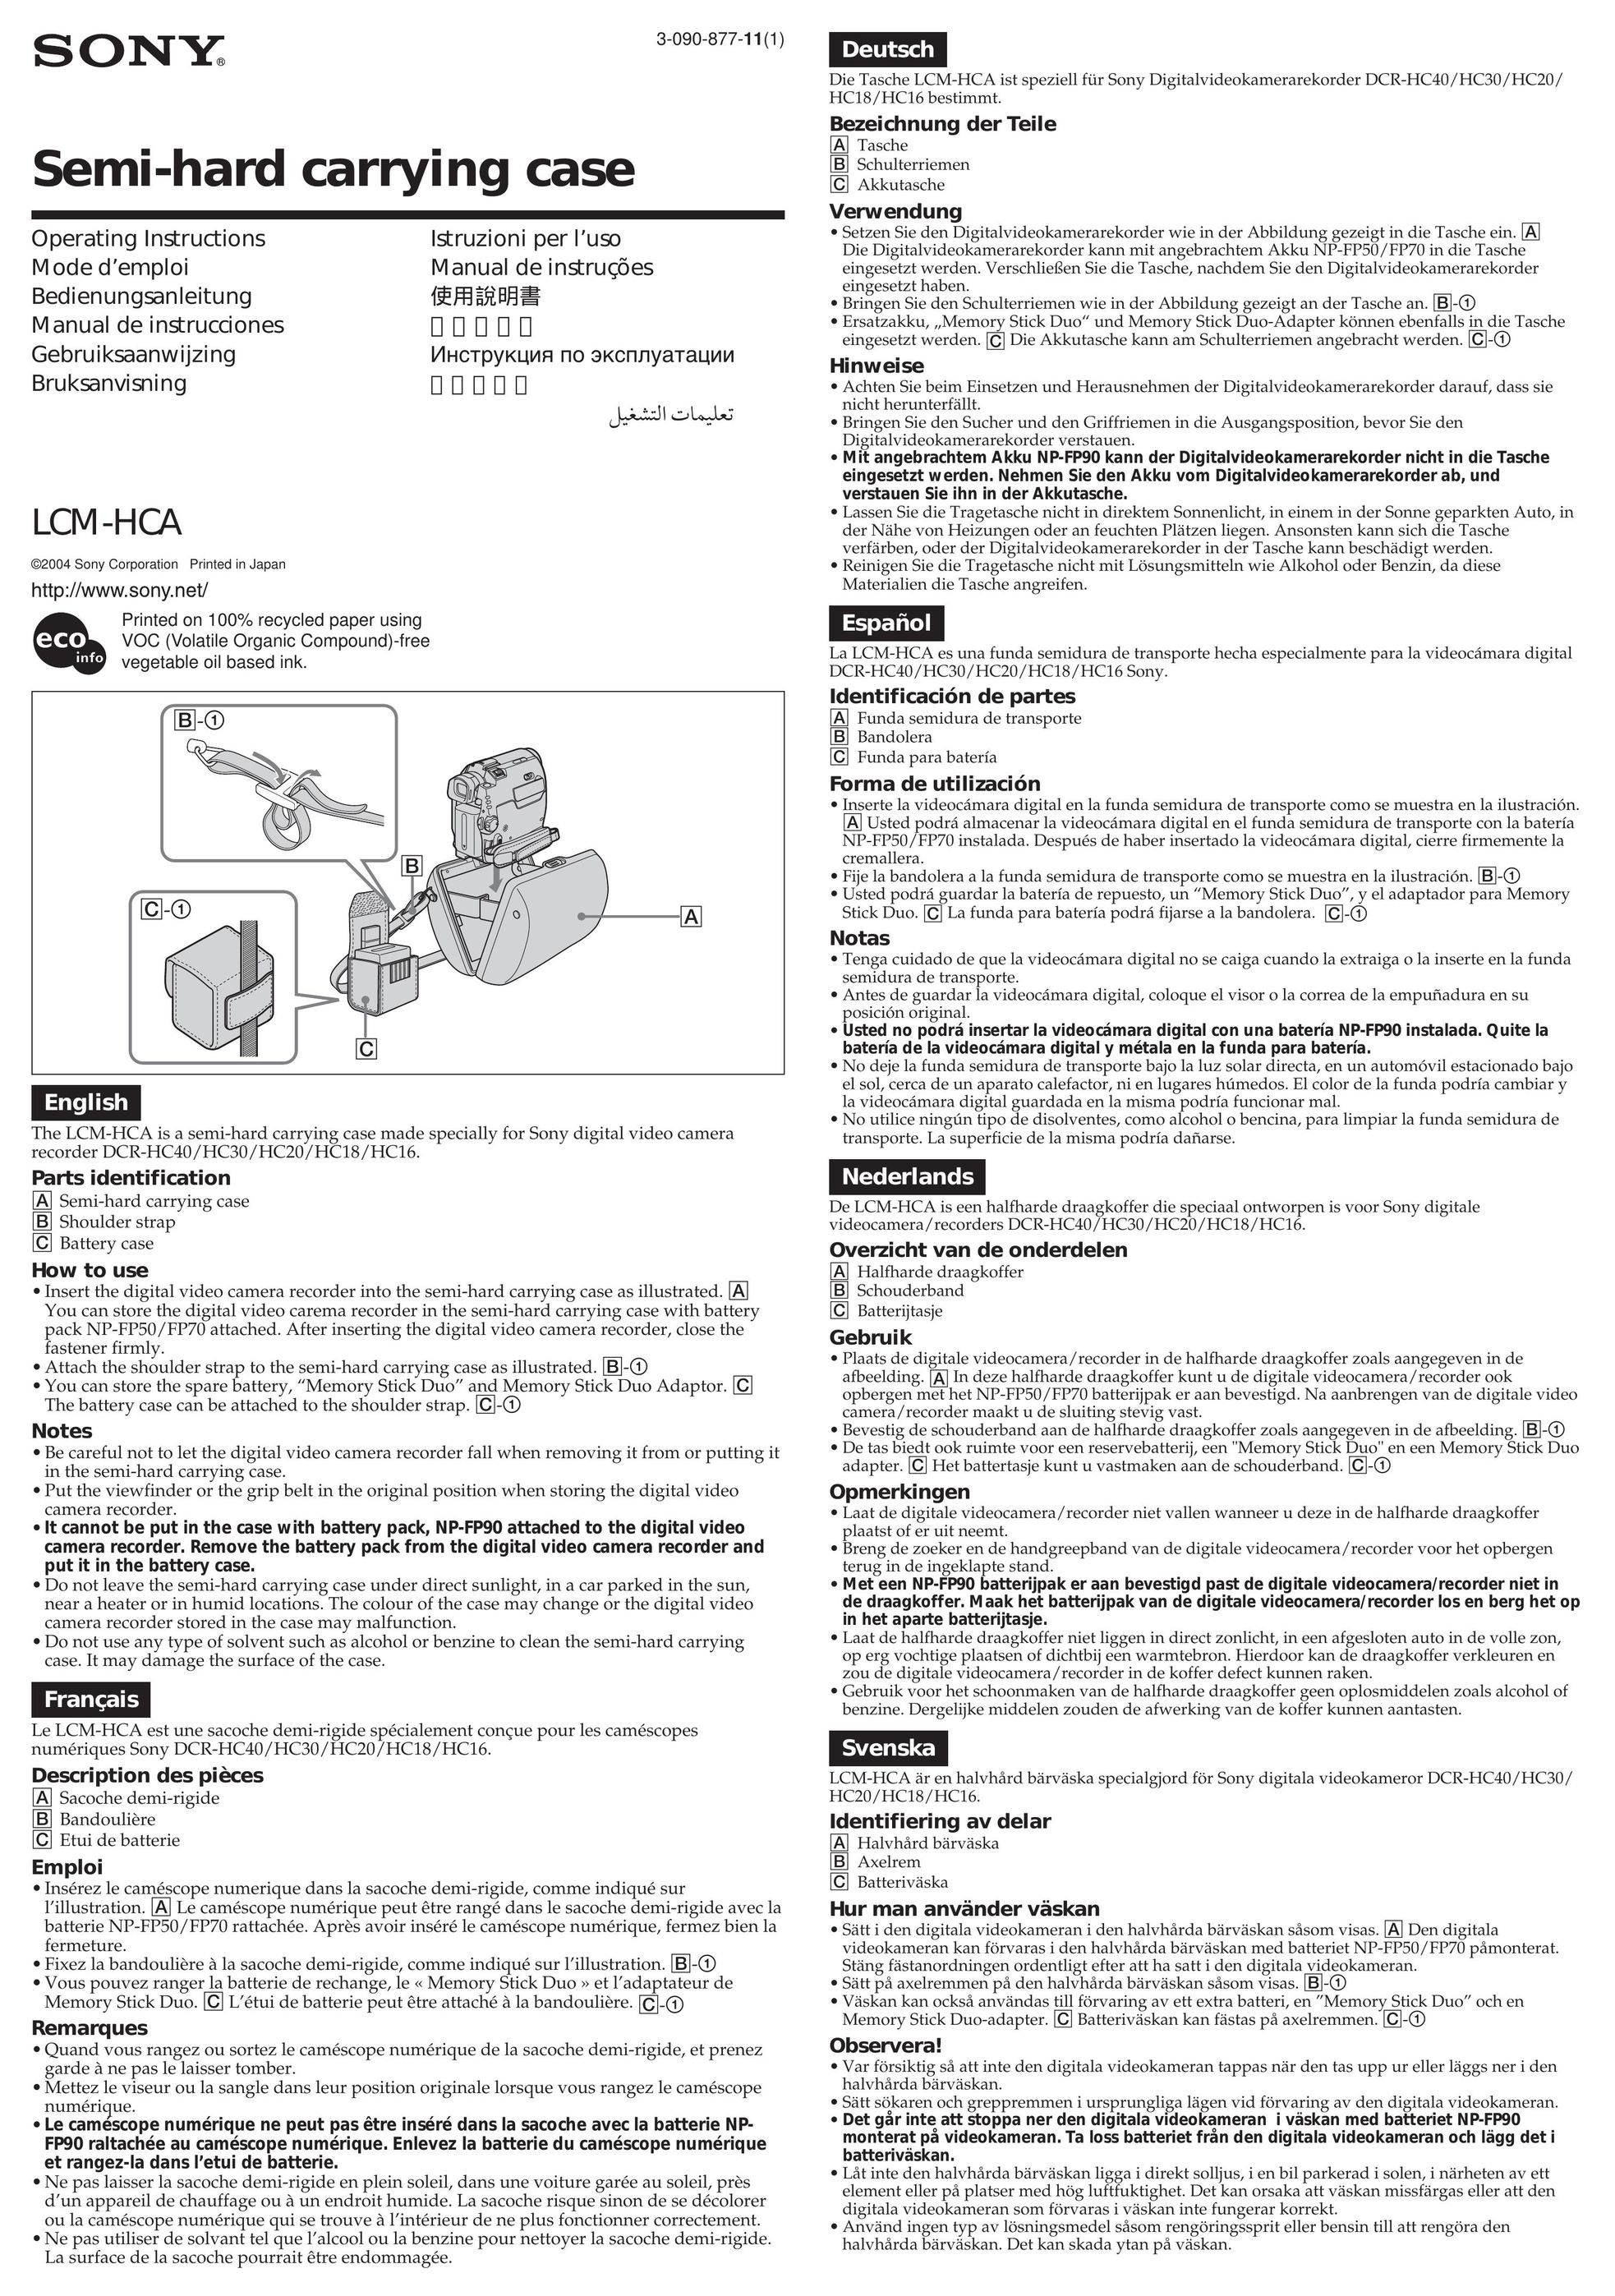 Sony LCM-HCA Carrying Case User Manual